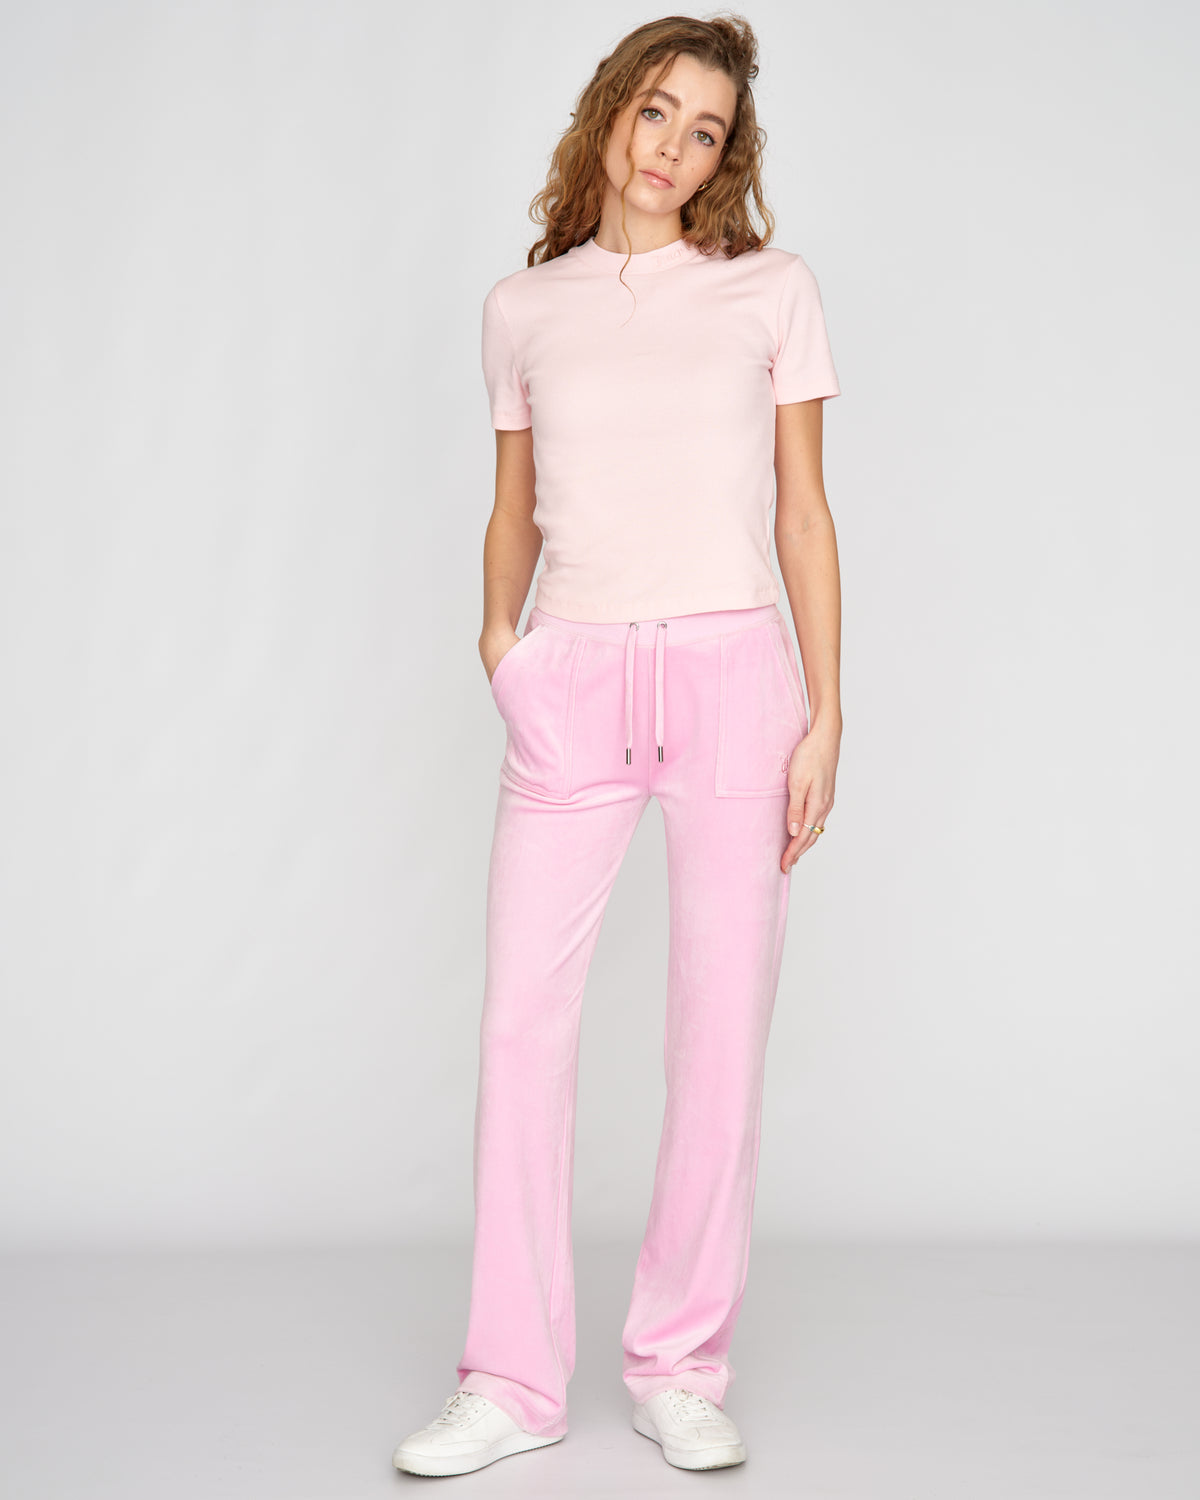 Classic Velour Del Ray Pant Begonia Pink - Juicy Couture Scandinavia